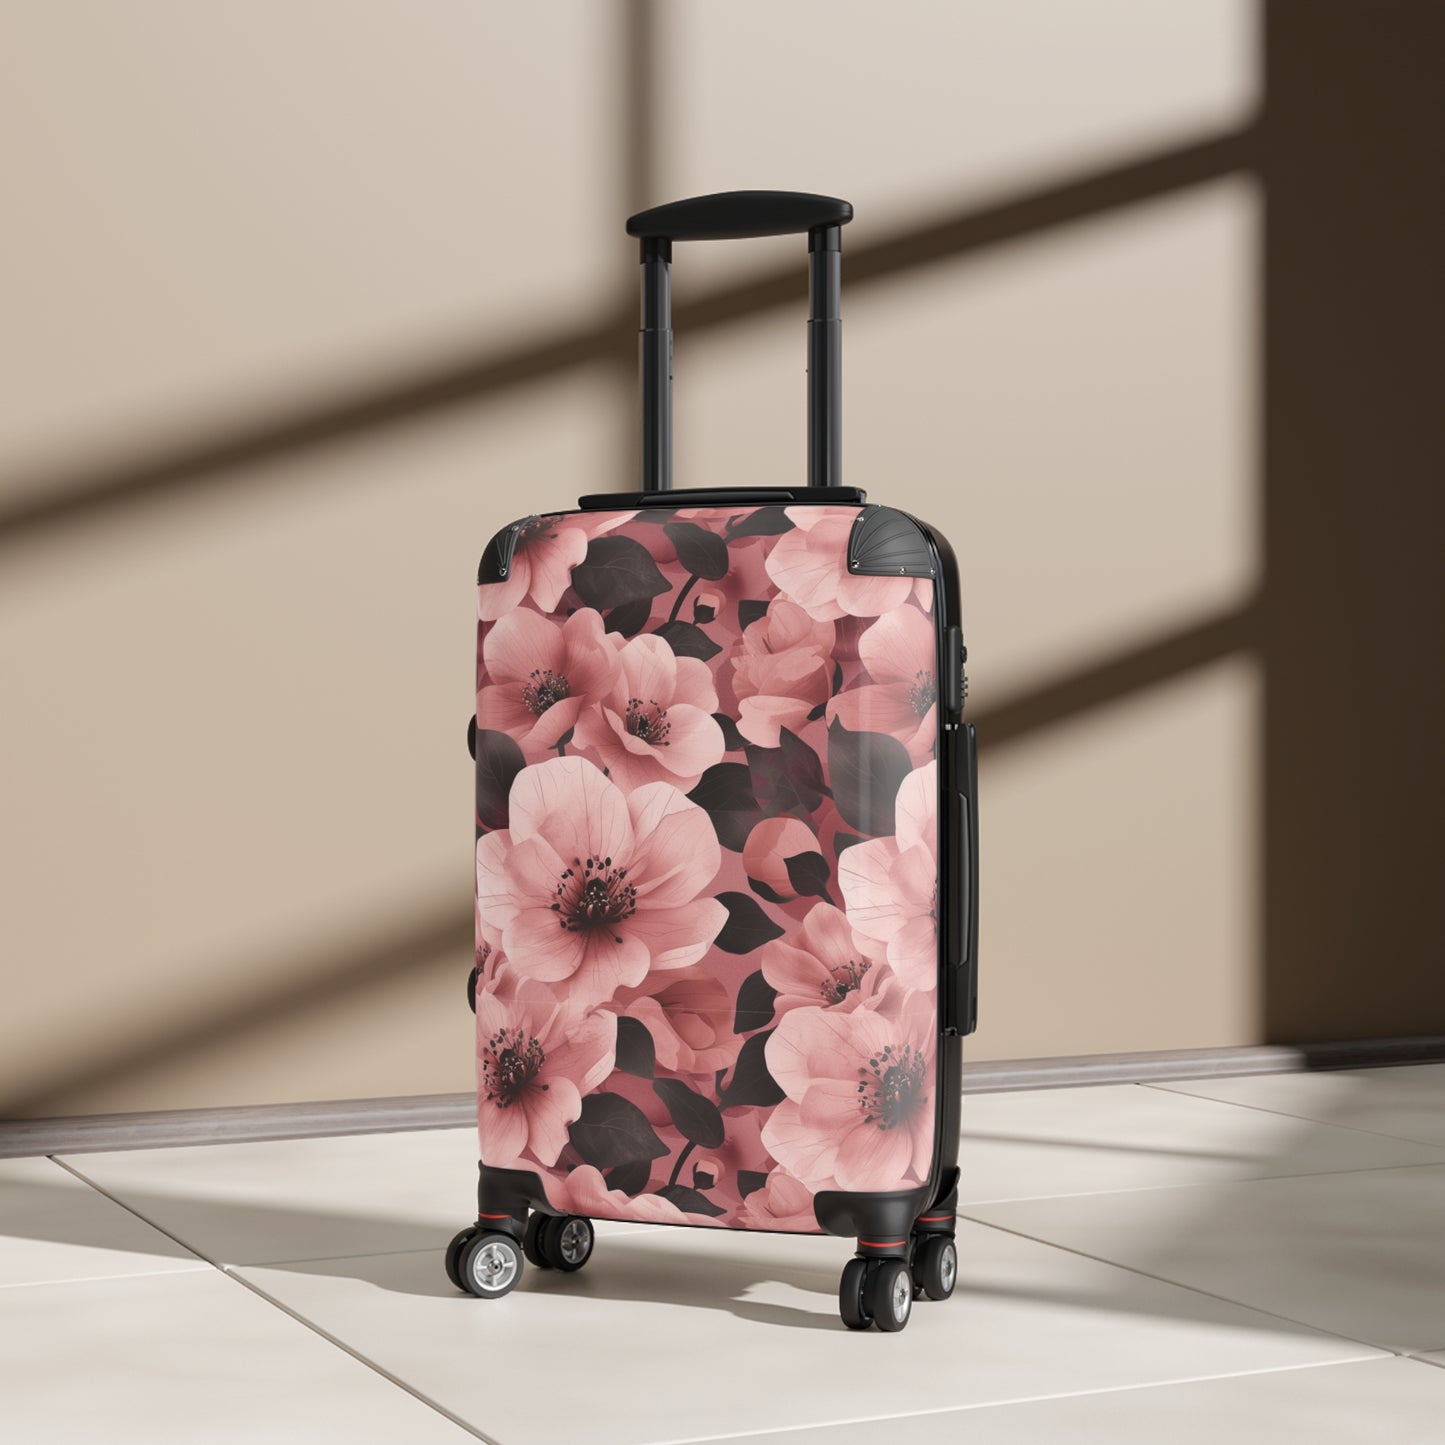 Floral Inspired Stylish & Unique Hard-Shell Suitcase: Durable, Lightweight, Expandable Luggage with 360° Swivel Wheels & Secure Lock for Fashion-Forward Travelers, Free US Shipping